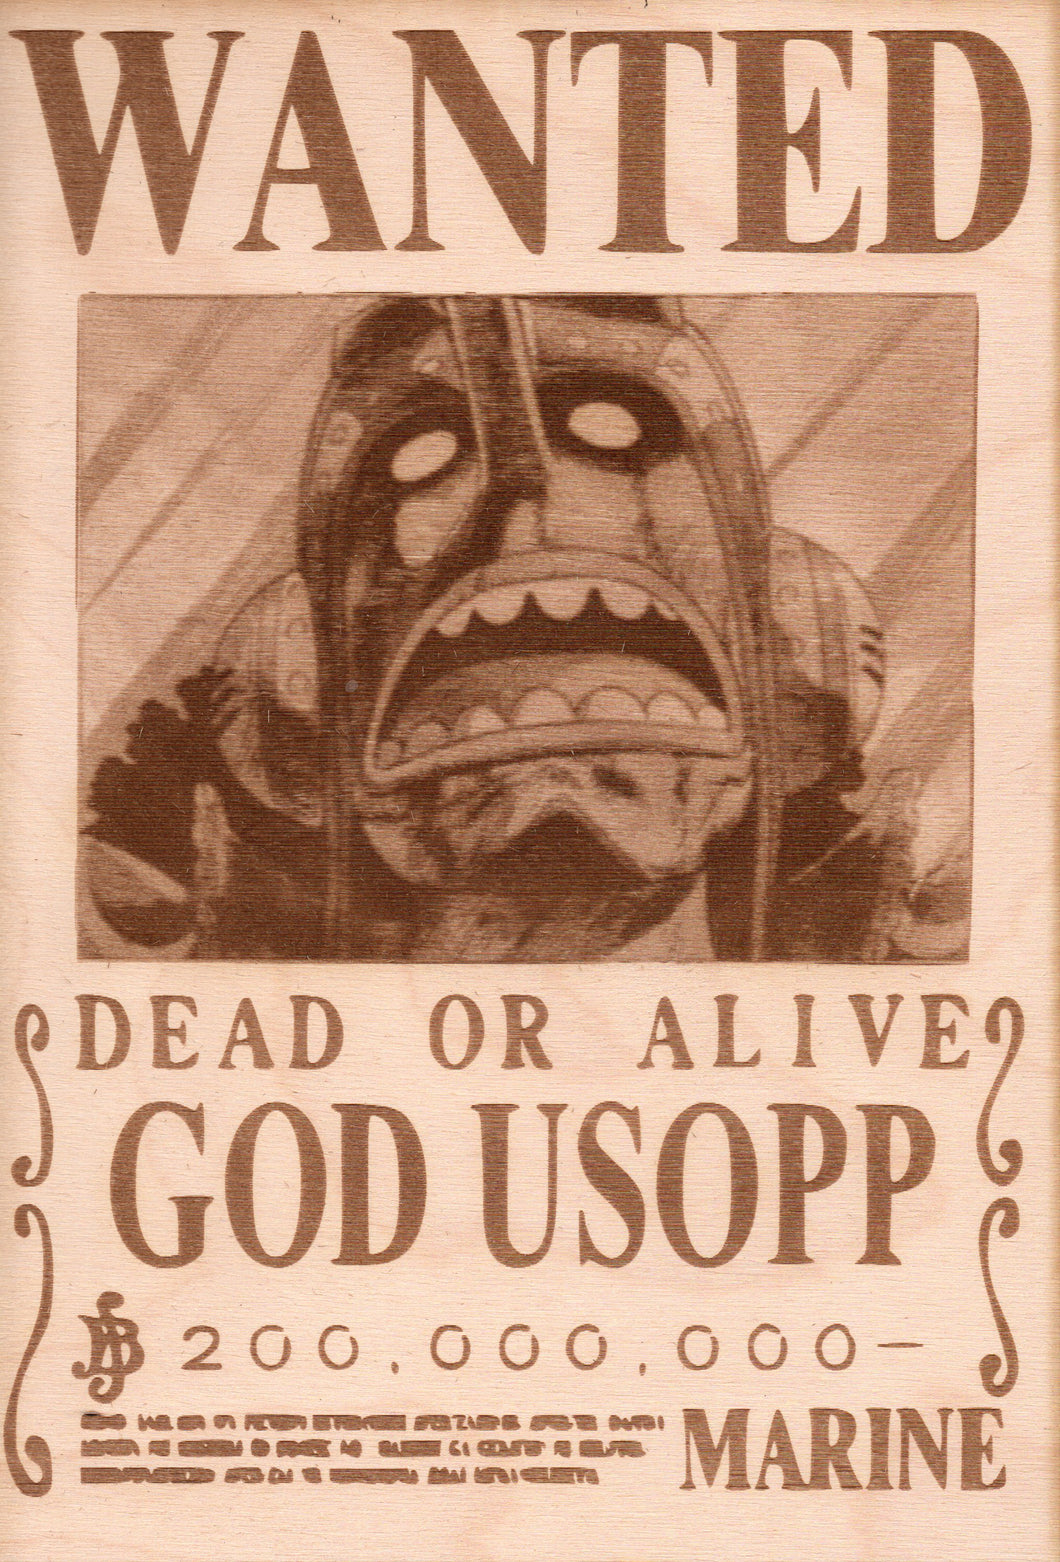 One Piece - God Usopp Wooden Wanted Poster - TantrumCollectibles.com